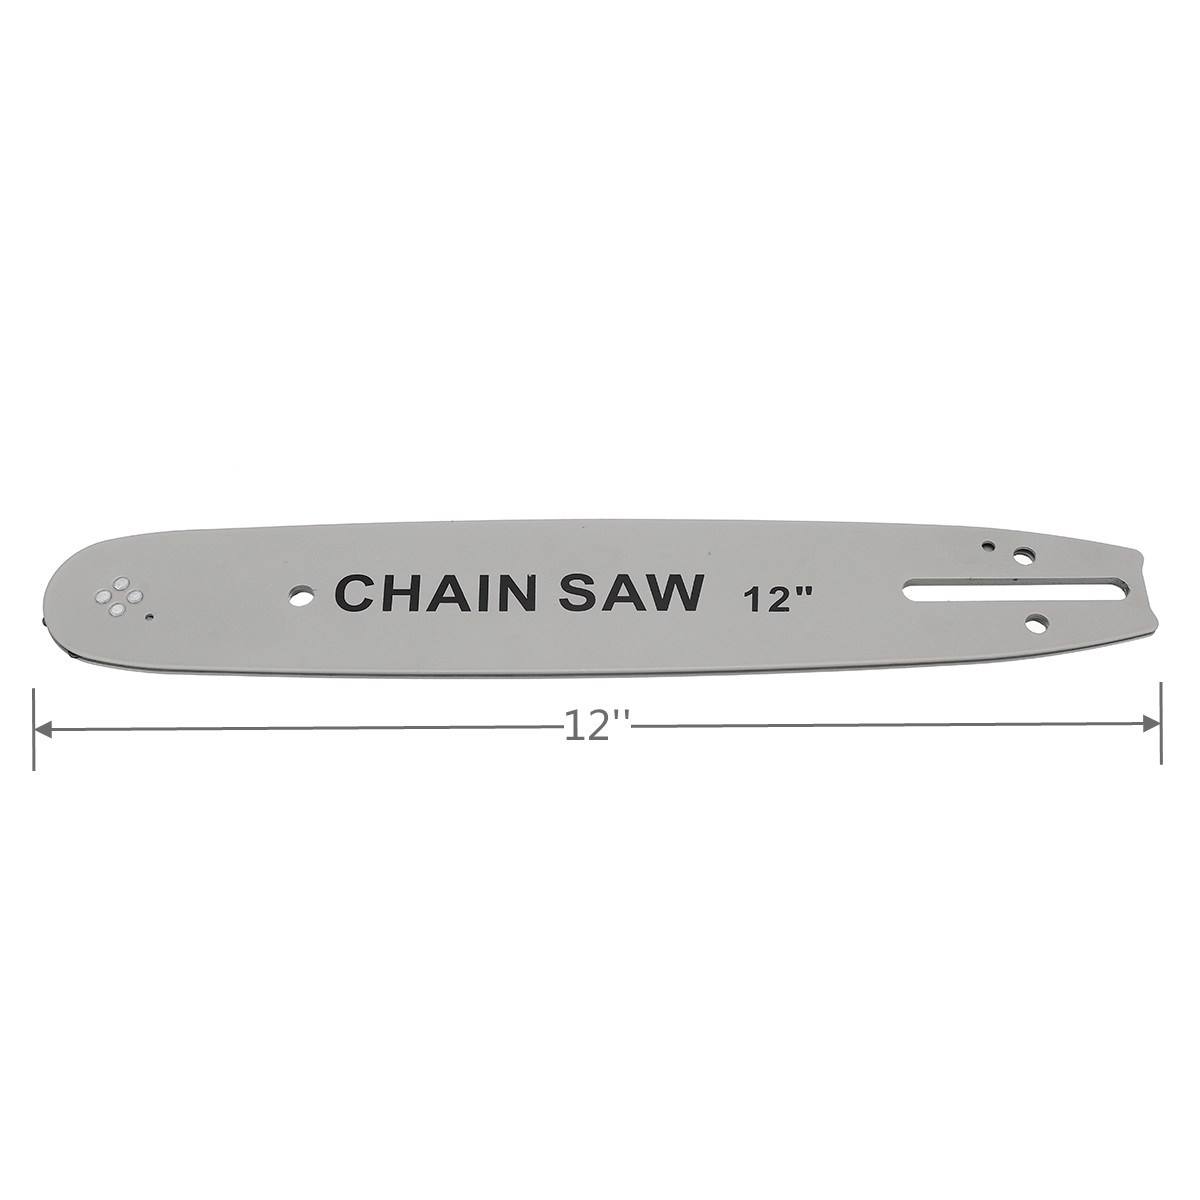 12-Inch-Chainsaw-Bracket-Electric-Chain-Saw-Stand-Set-Part-For-100-Angle-Grinder-1755370-8